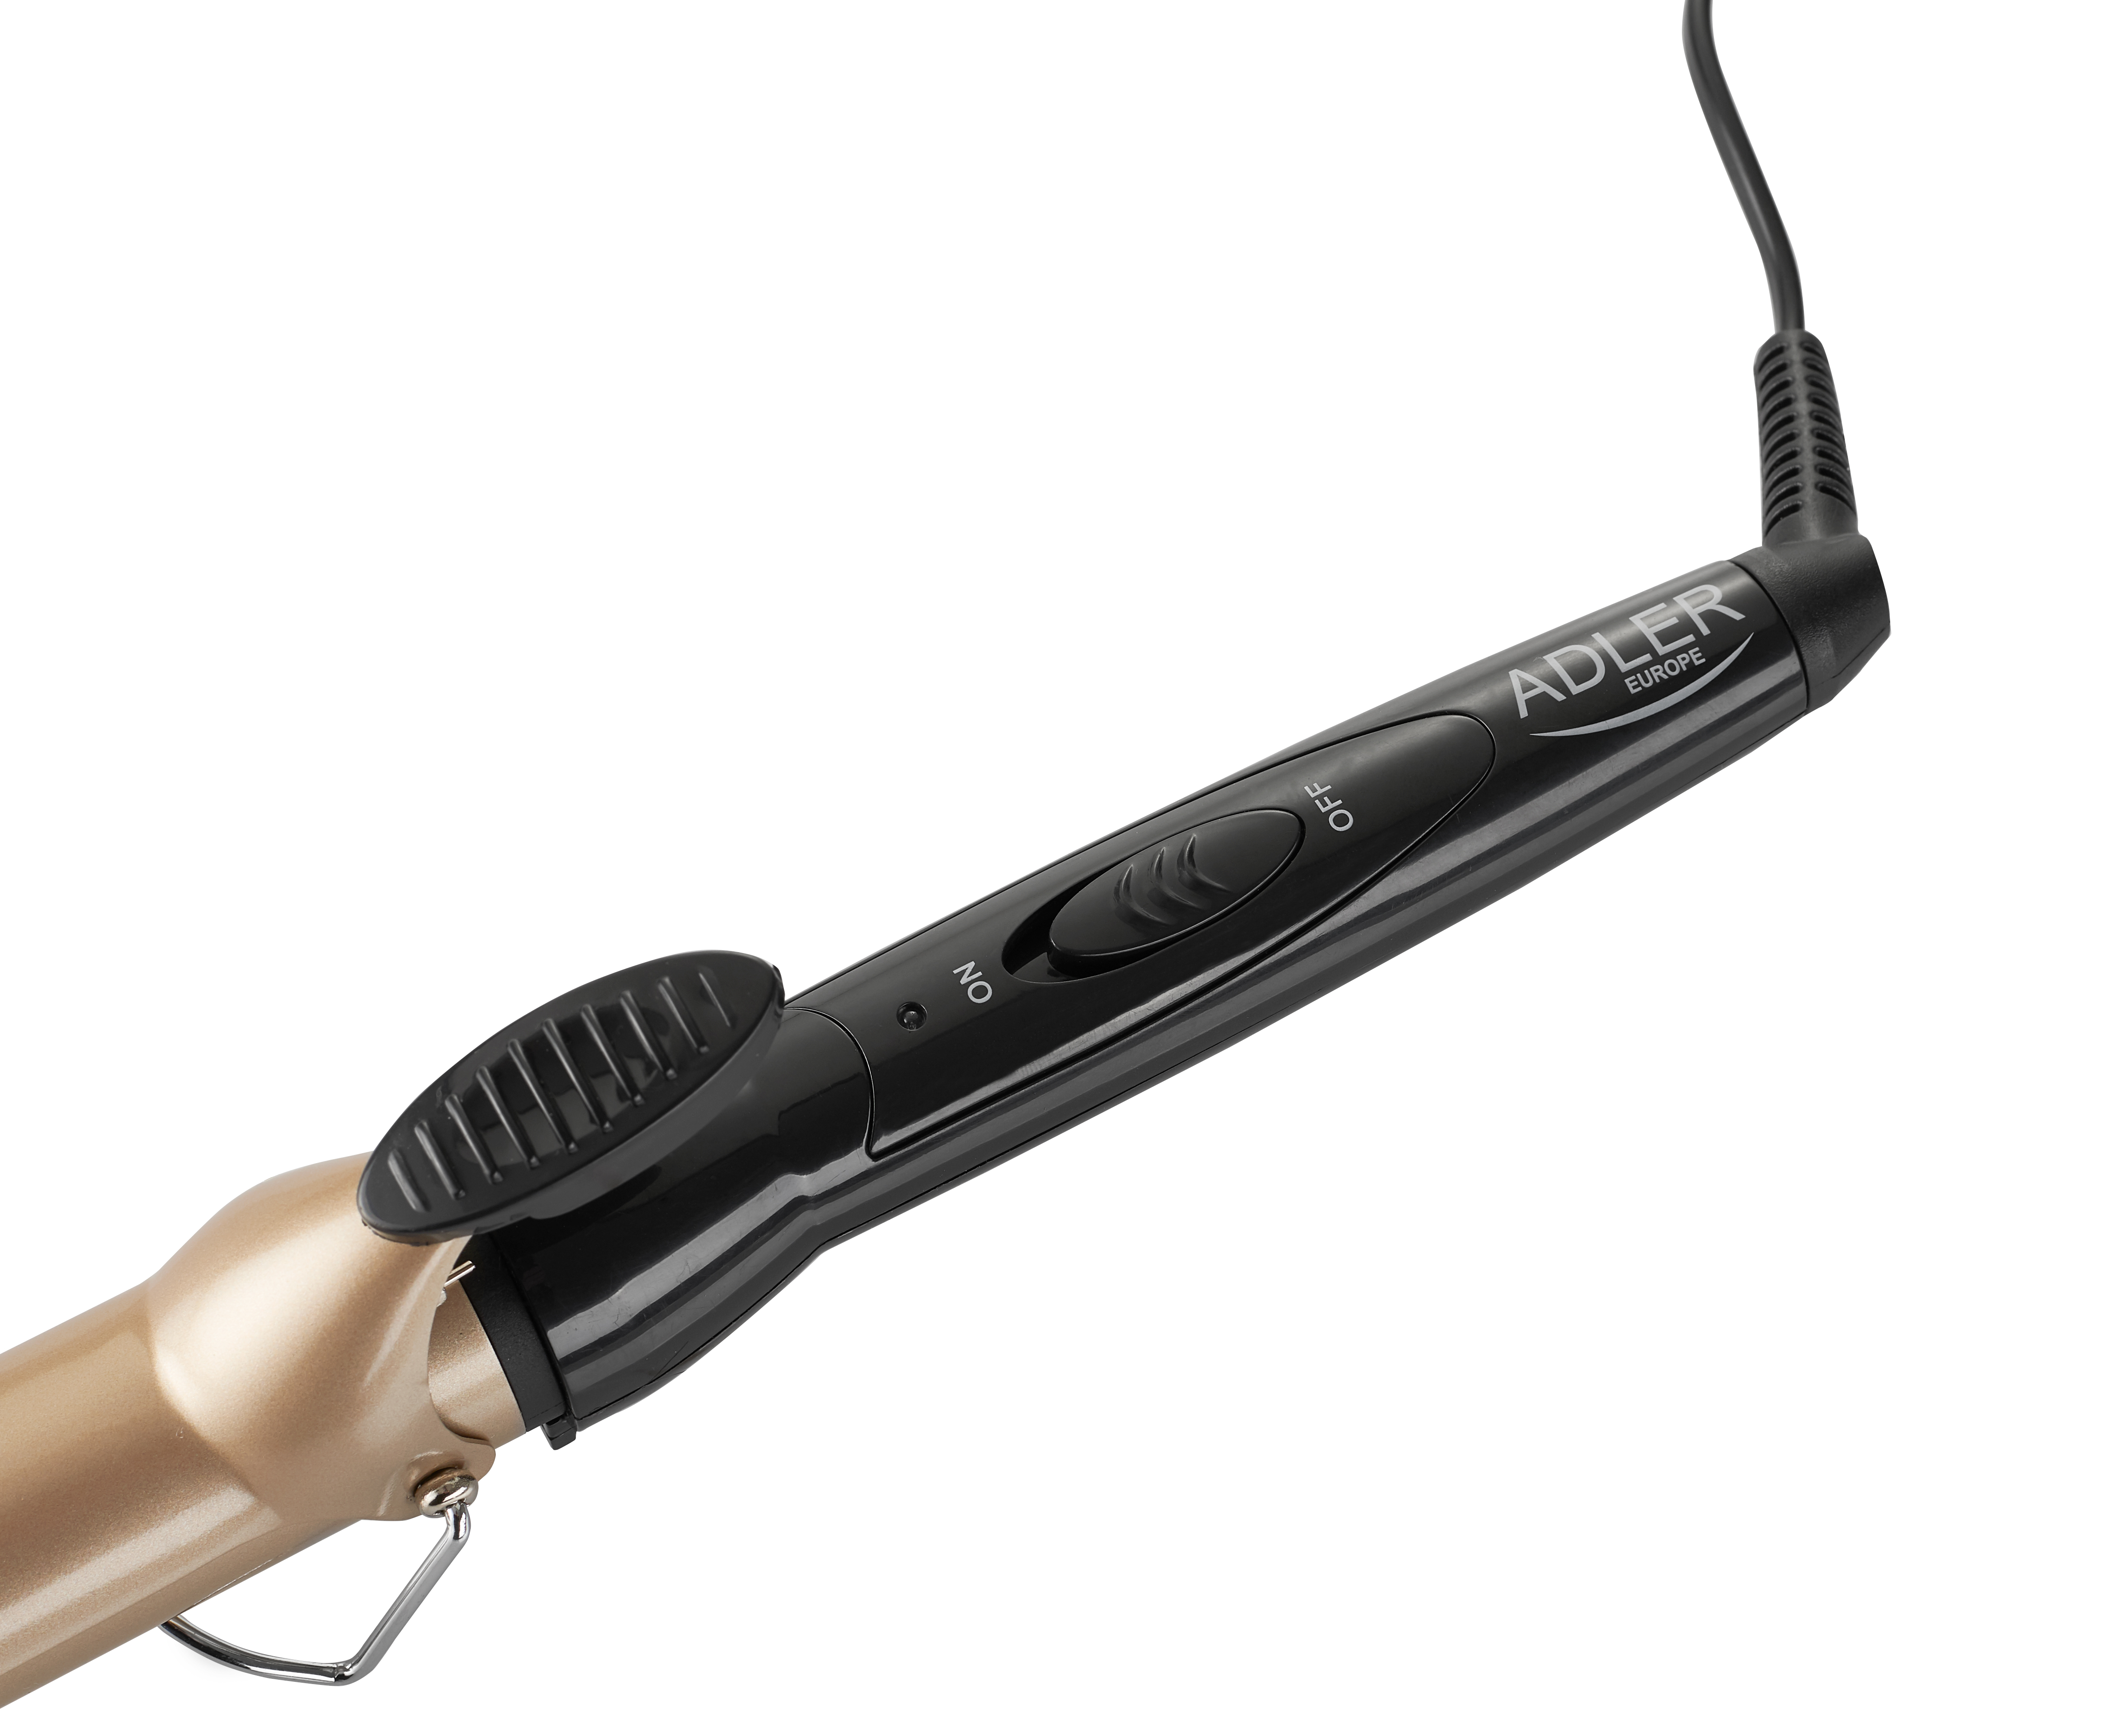 Curling iron - 32mm